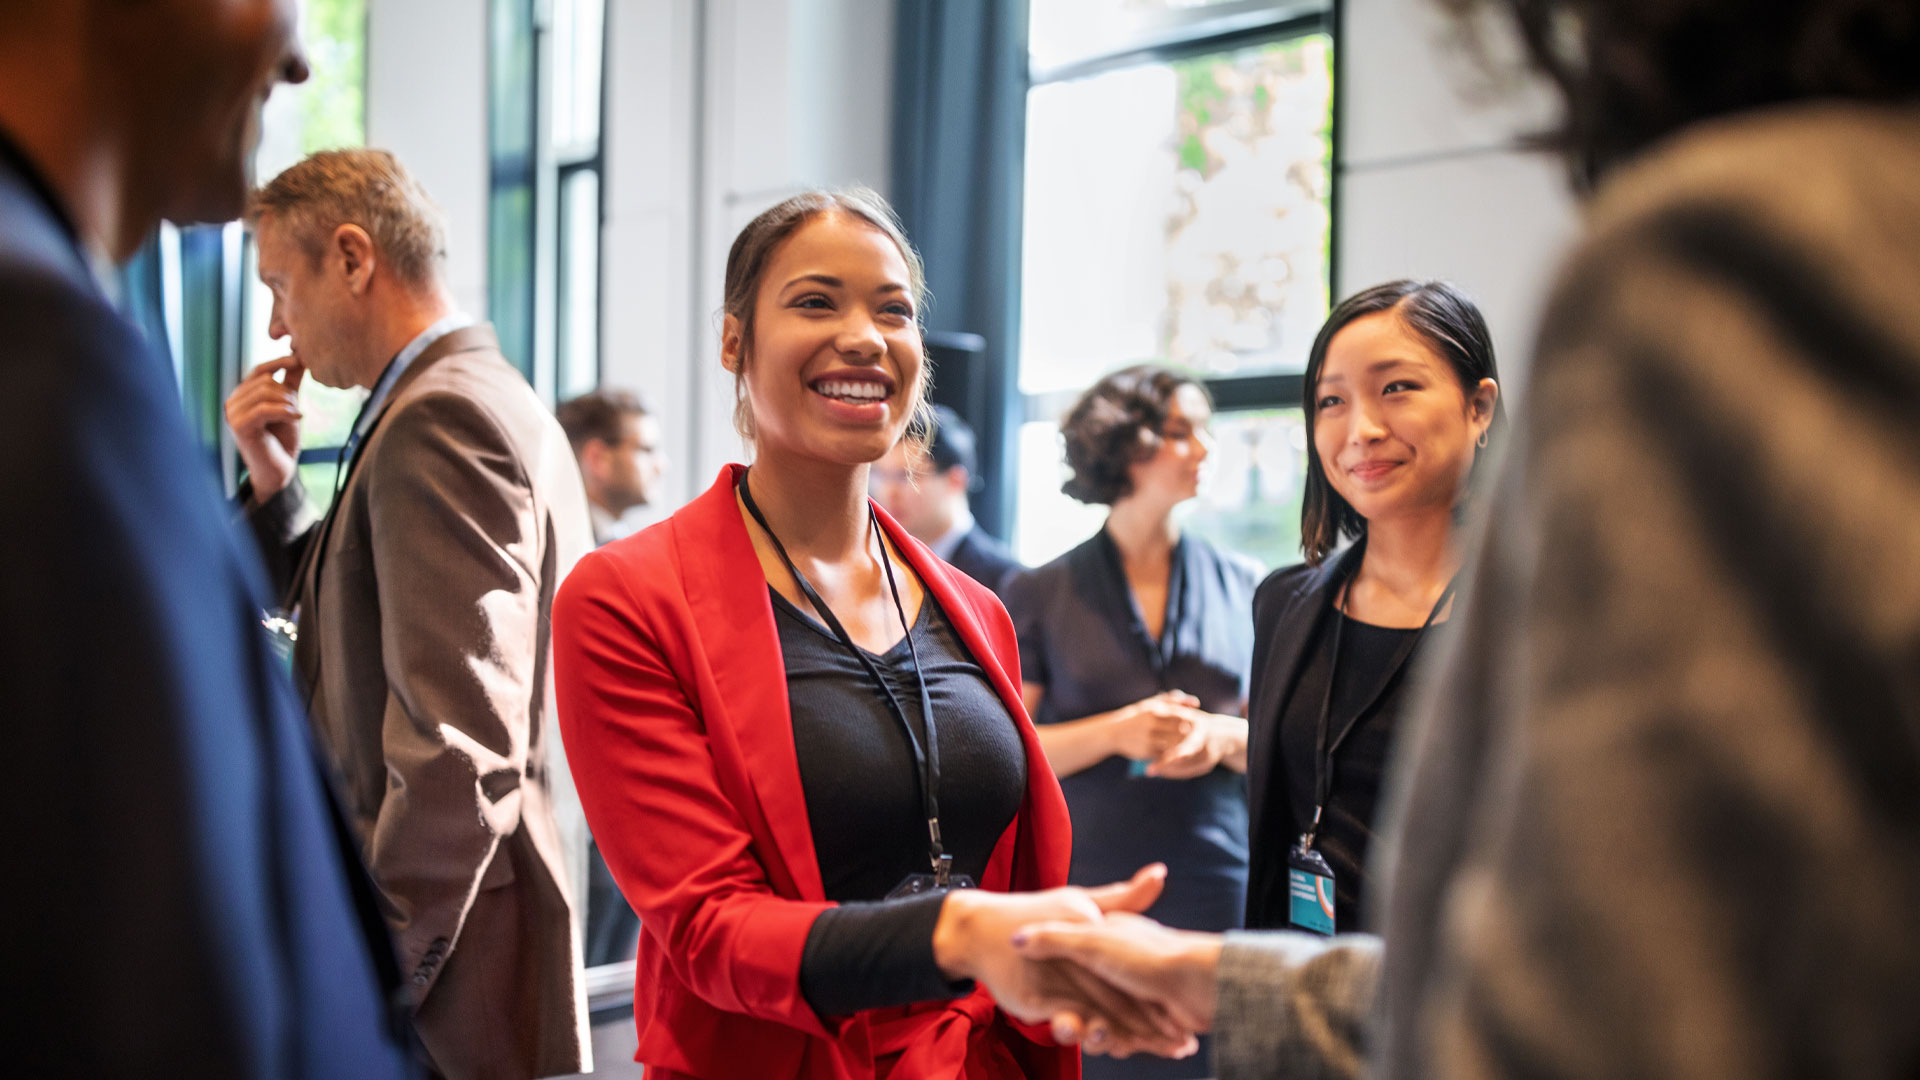 Two female professionals greeting each other at a networking event.